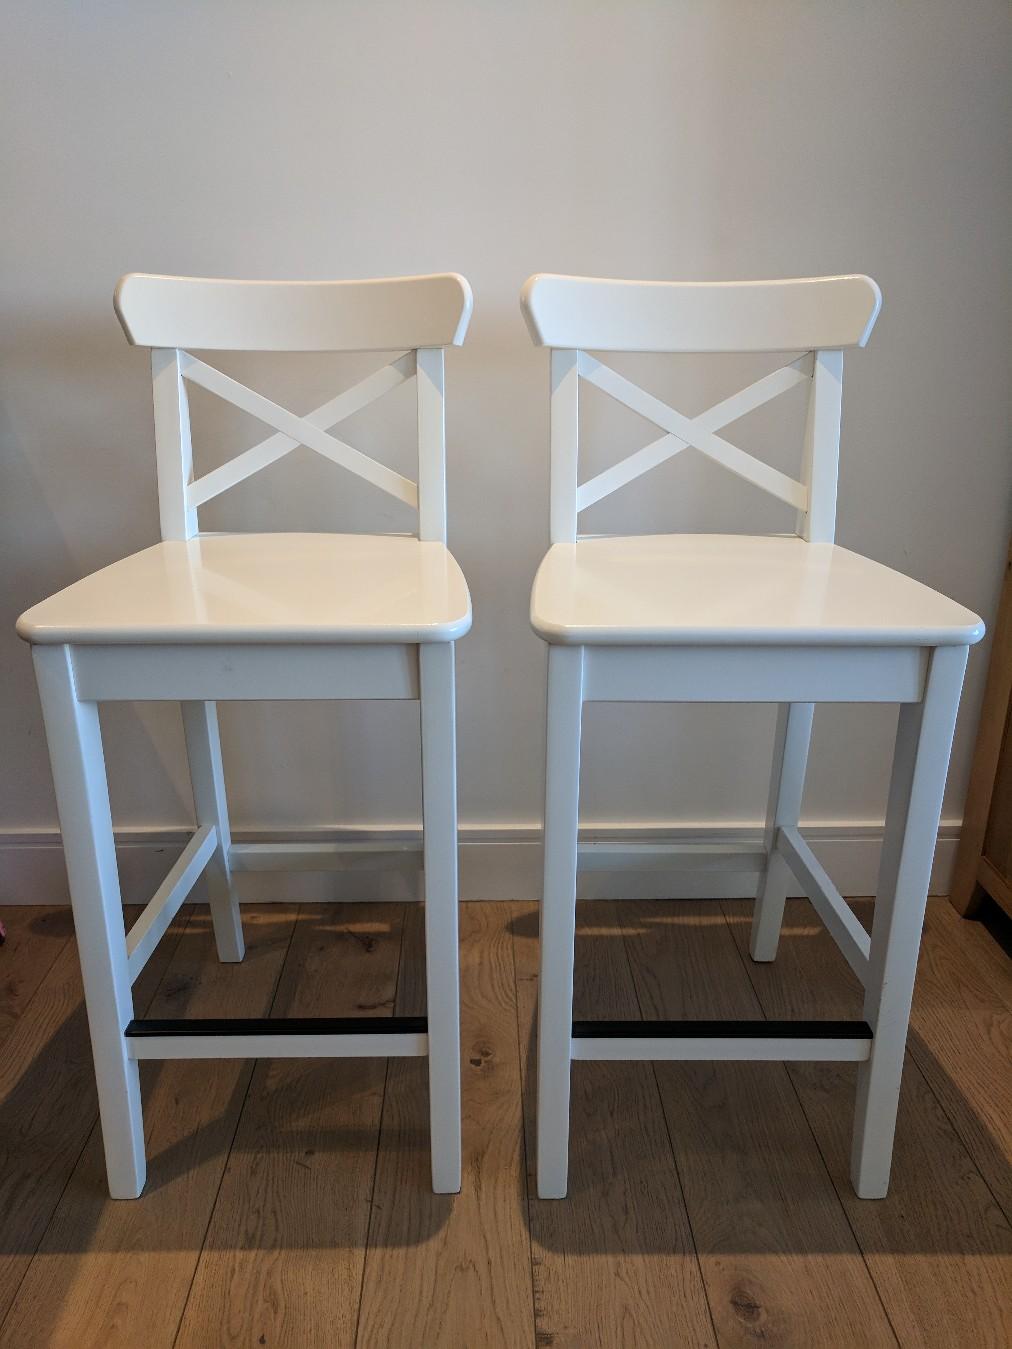 2 White IKEA Ingolf bar stools with backrest in TW8 Hounslow for £30.00